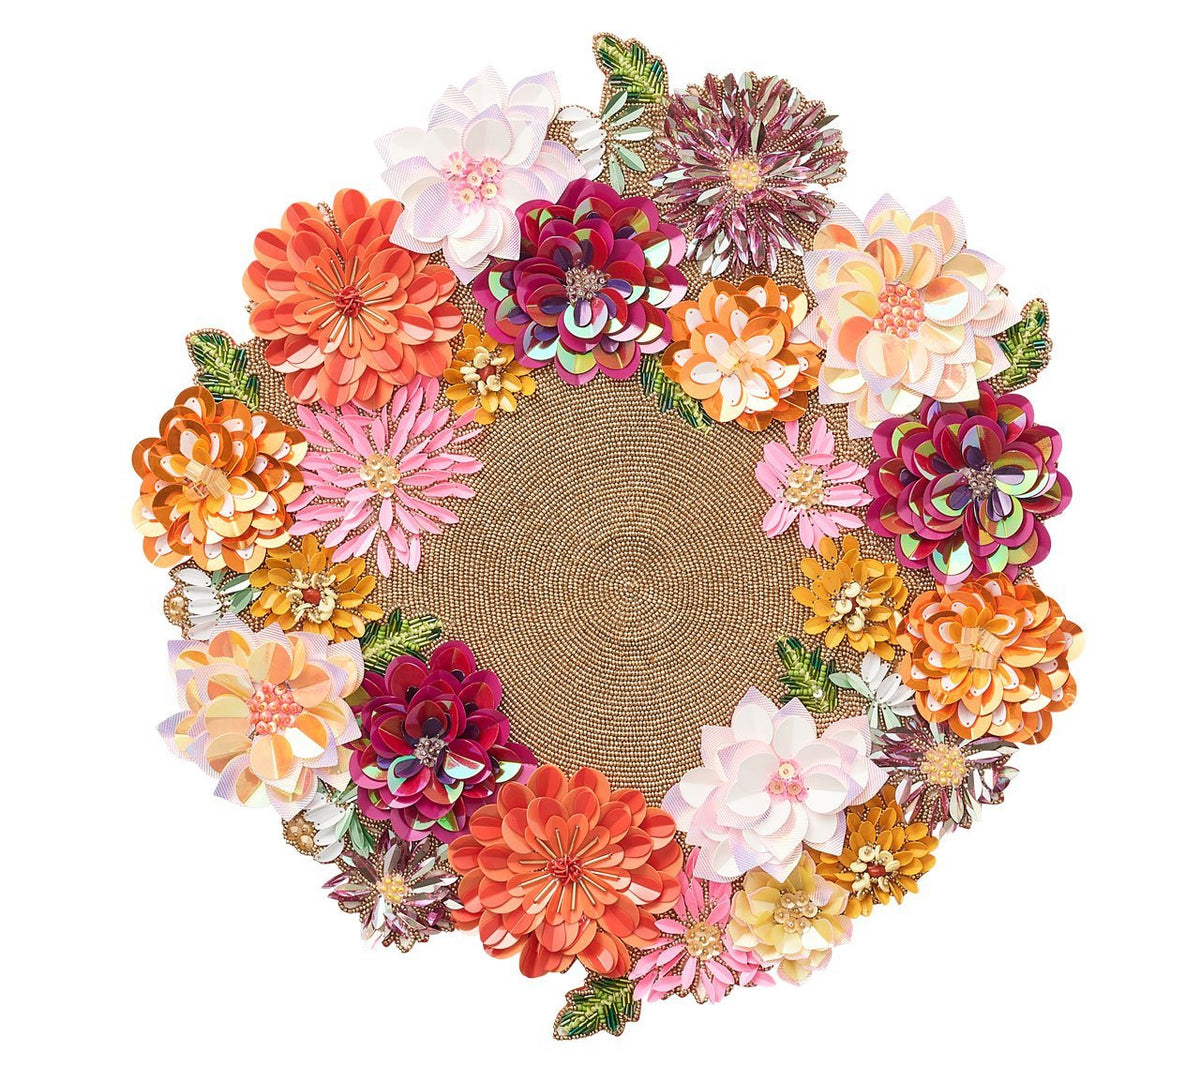 Dahlia Placemat featuring beaded florals in shades of pink and orange